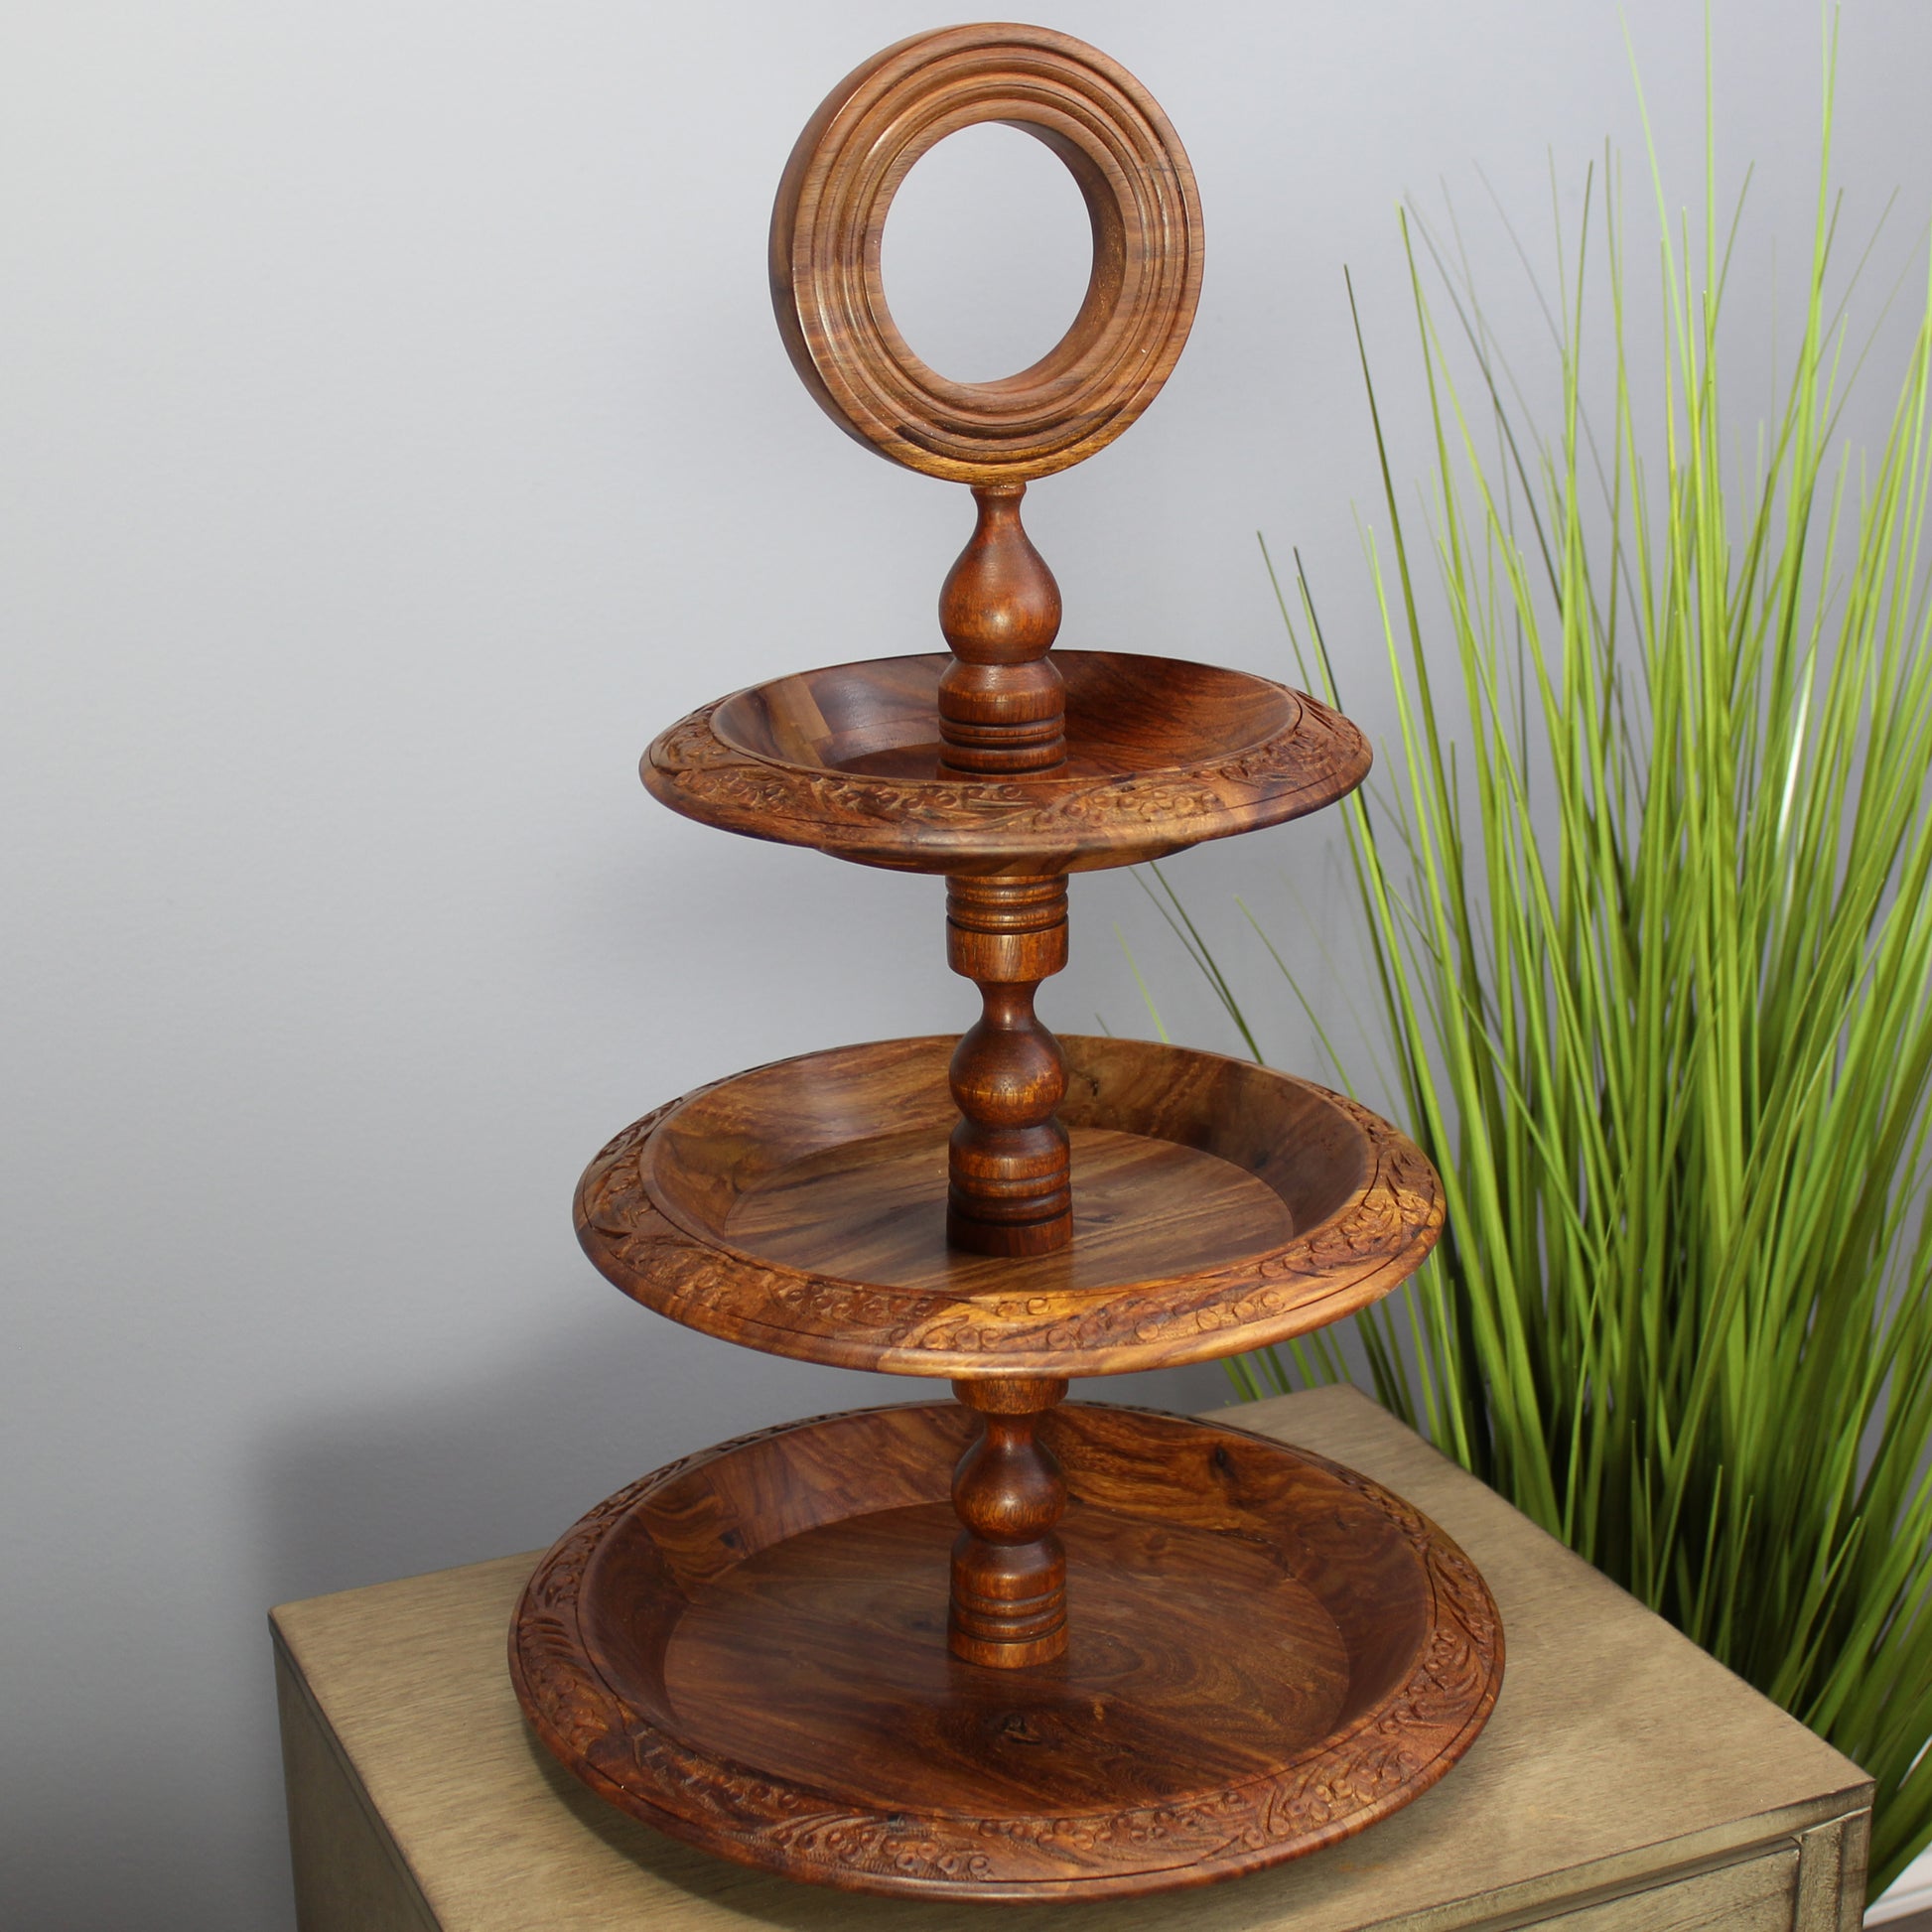 Natural Geo Decorative Rosewood Handcarved Wooden Tiered Stand